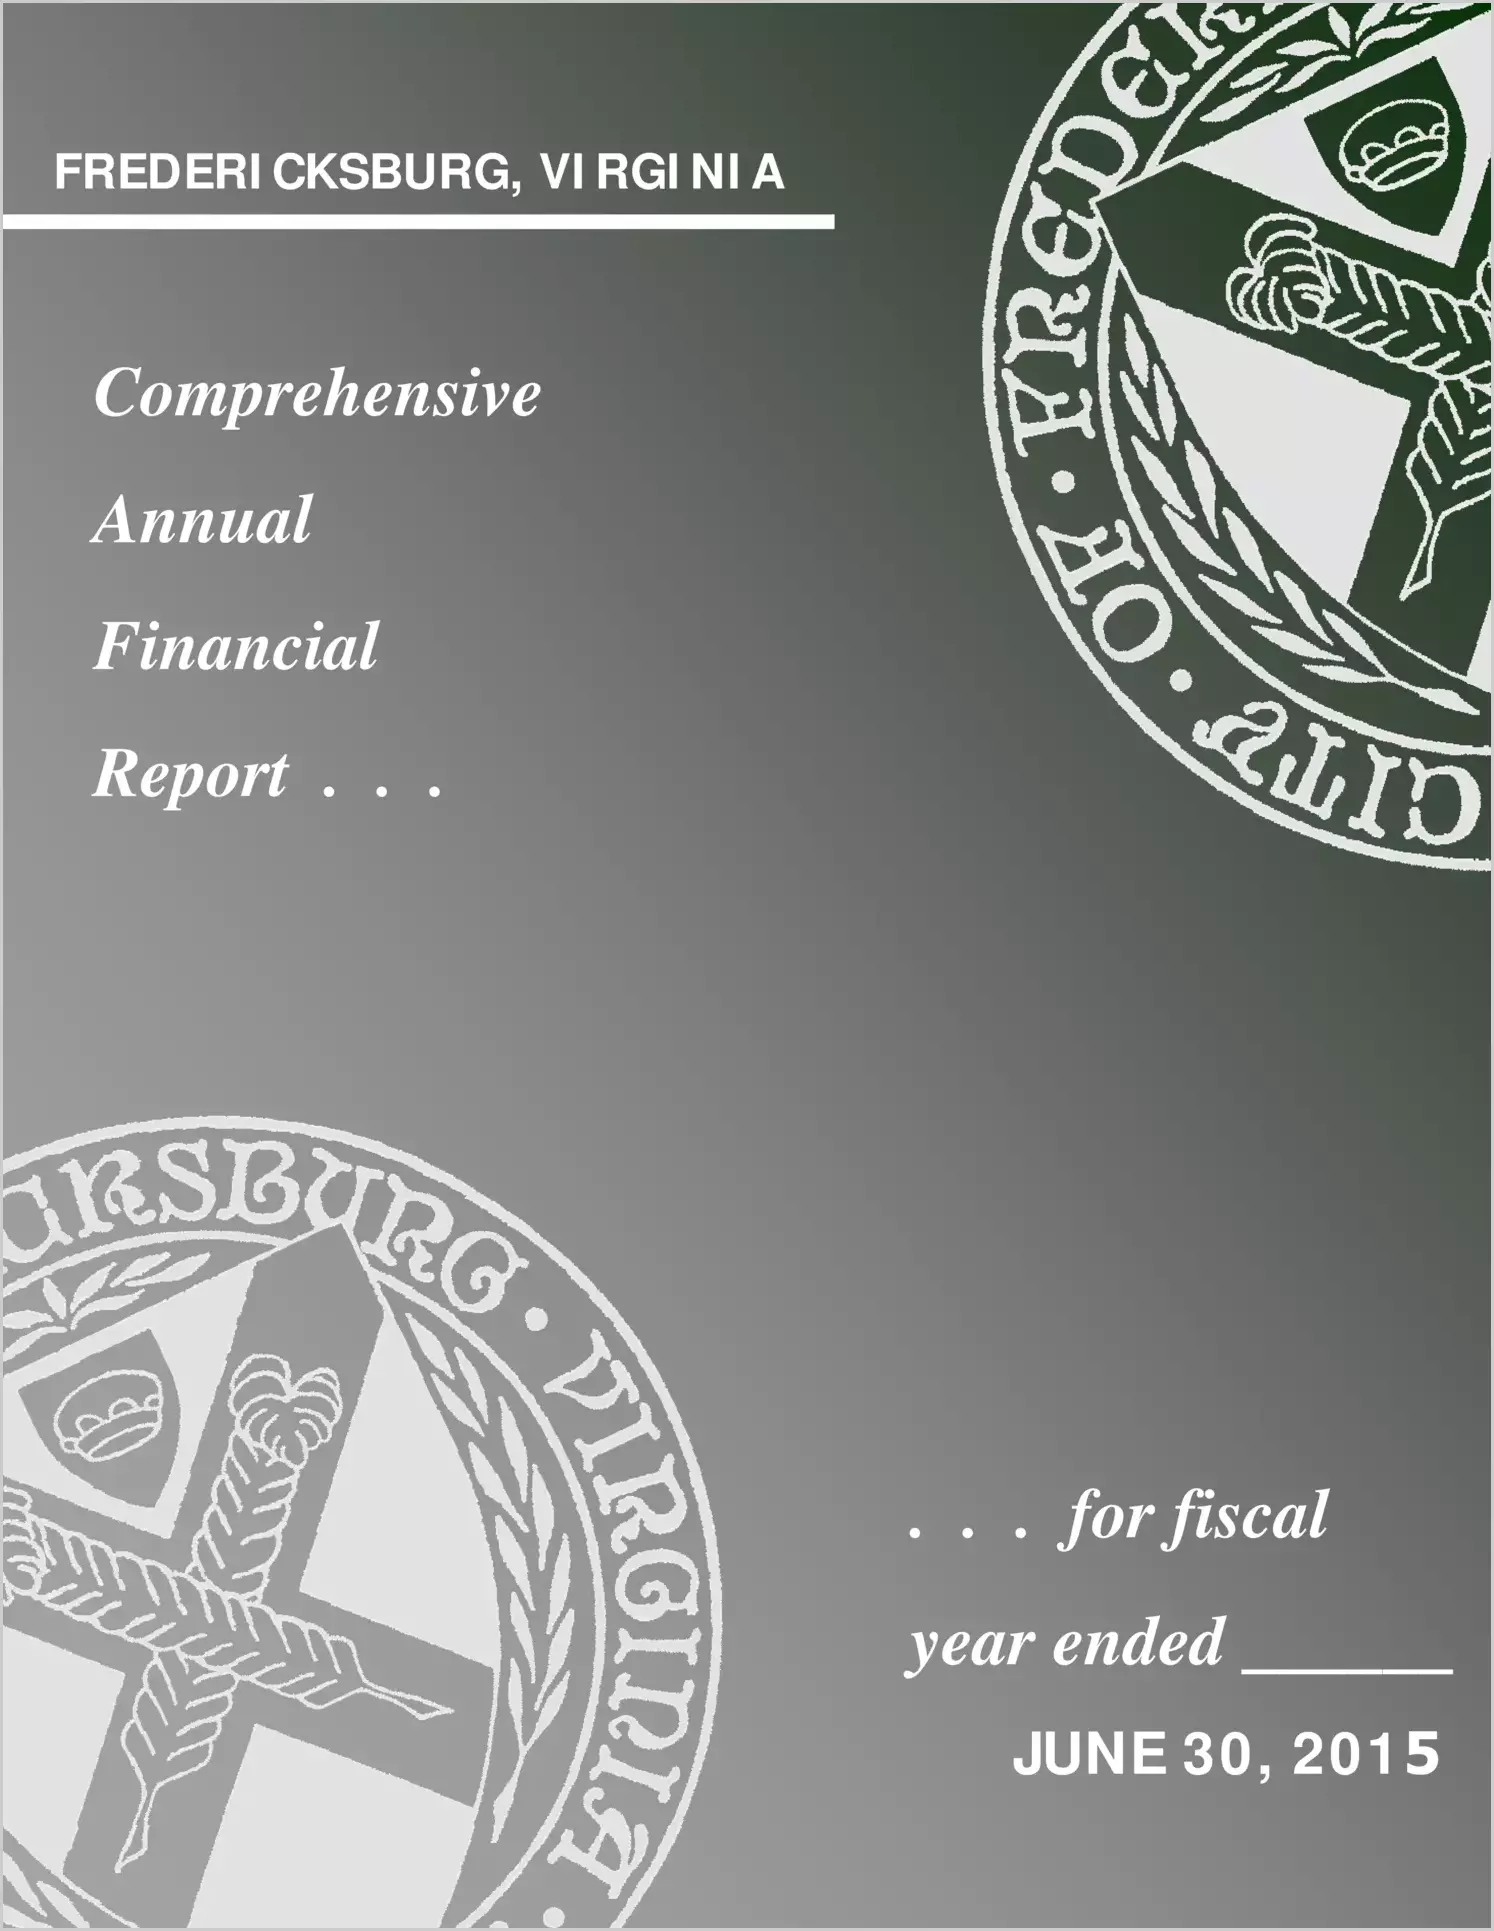 2015 Annual Financial Report for City of Fredericksburg